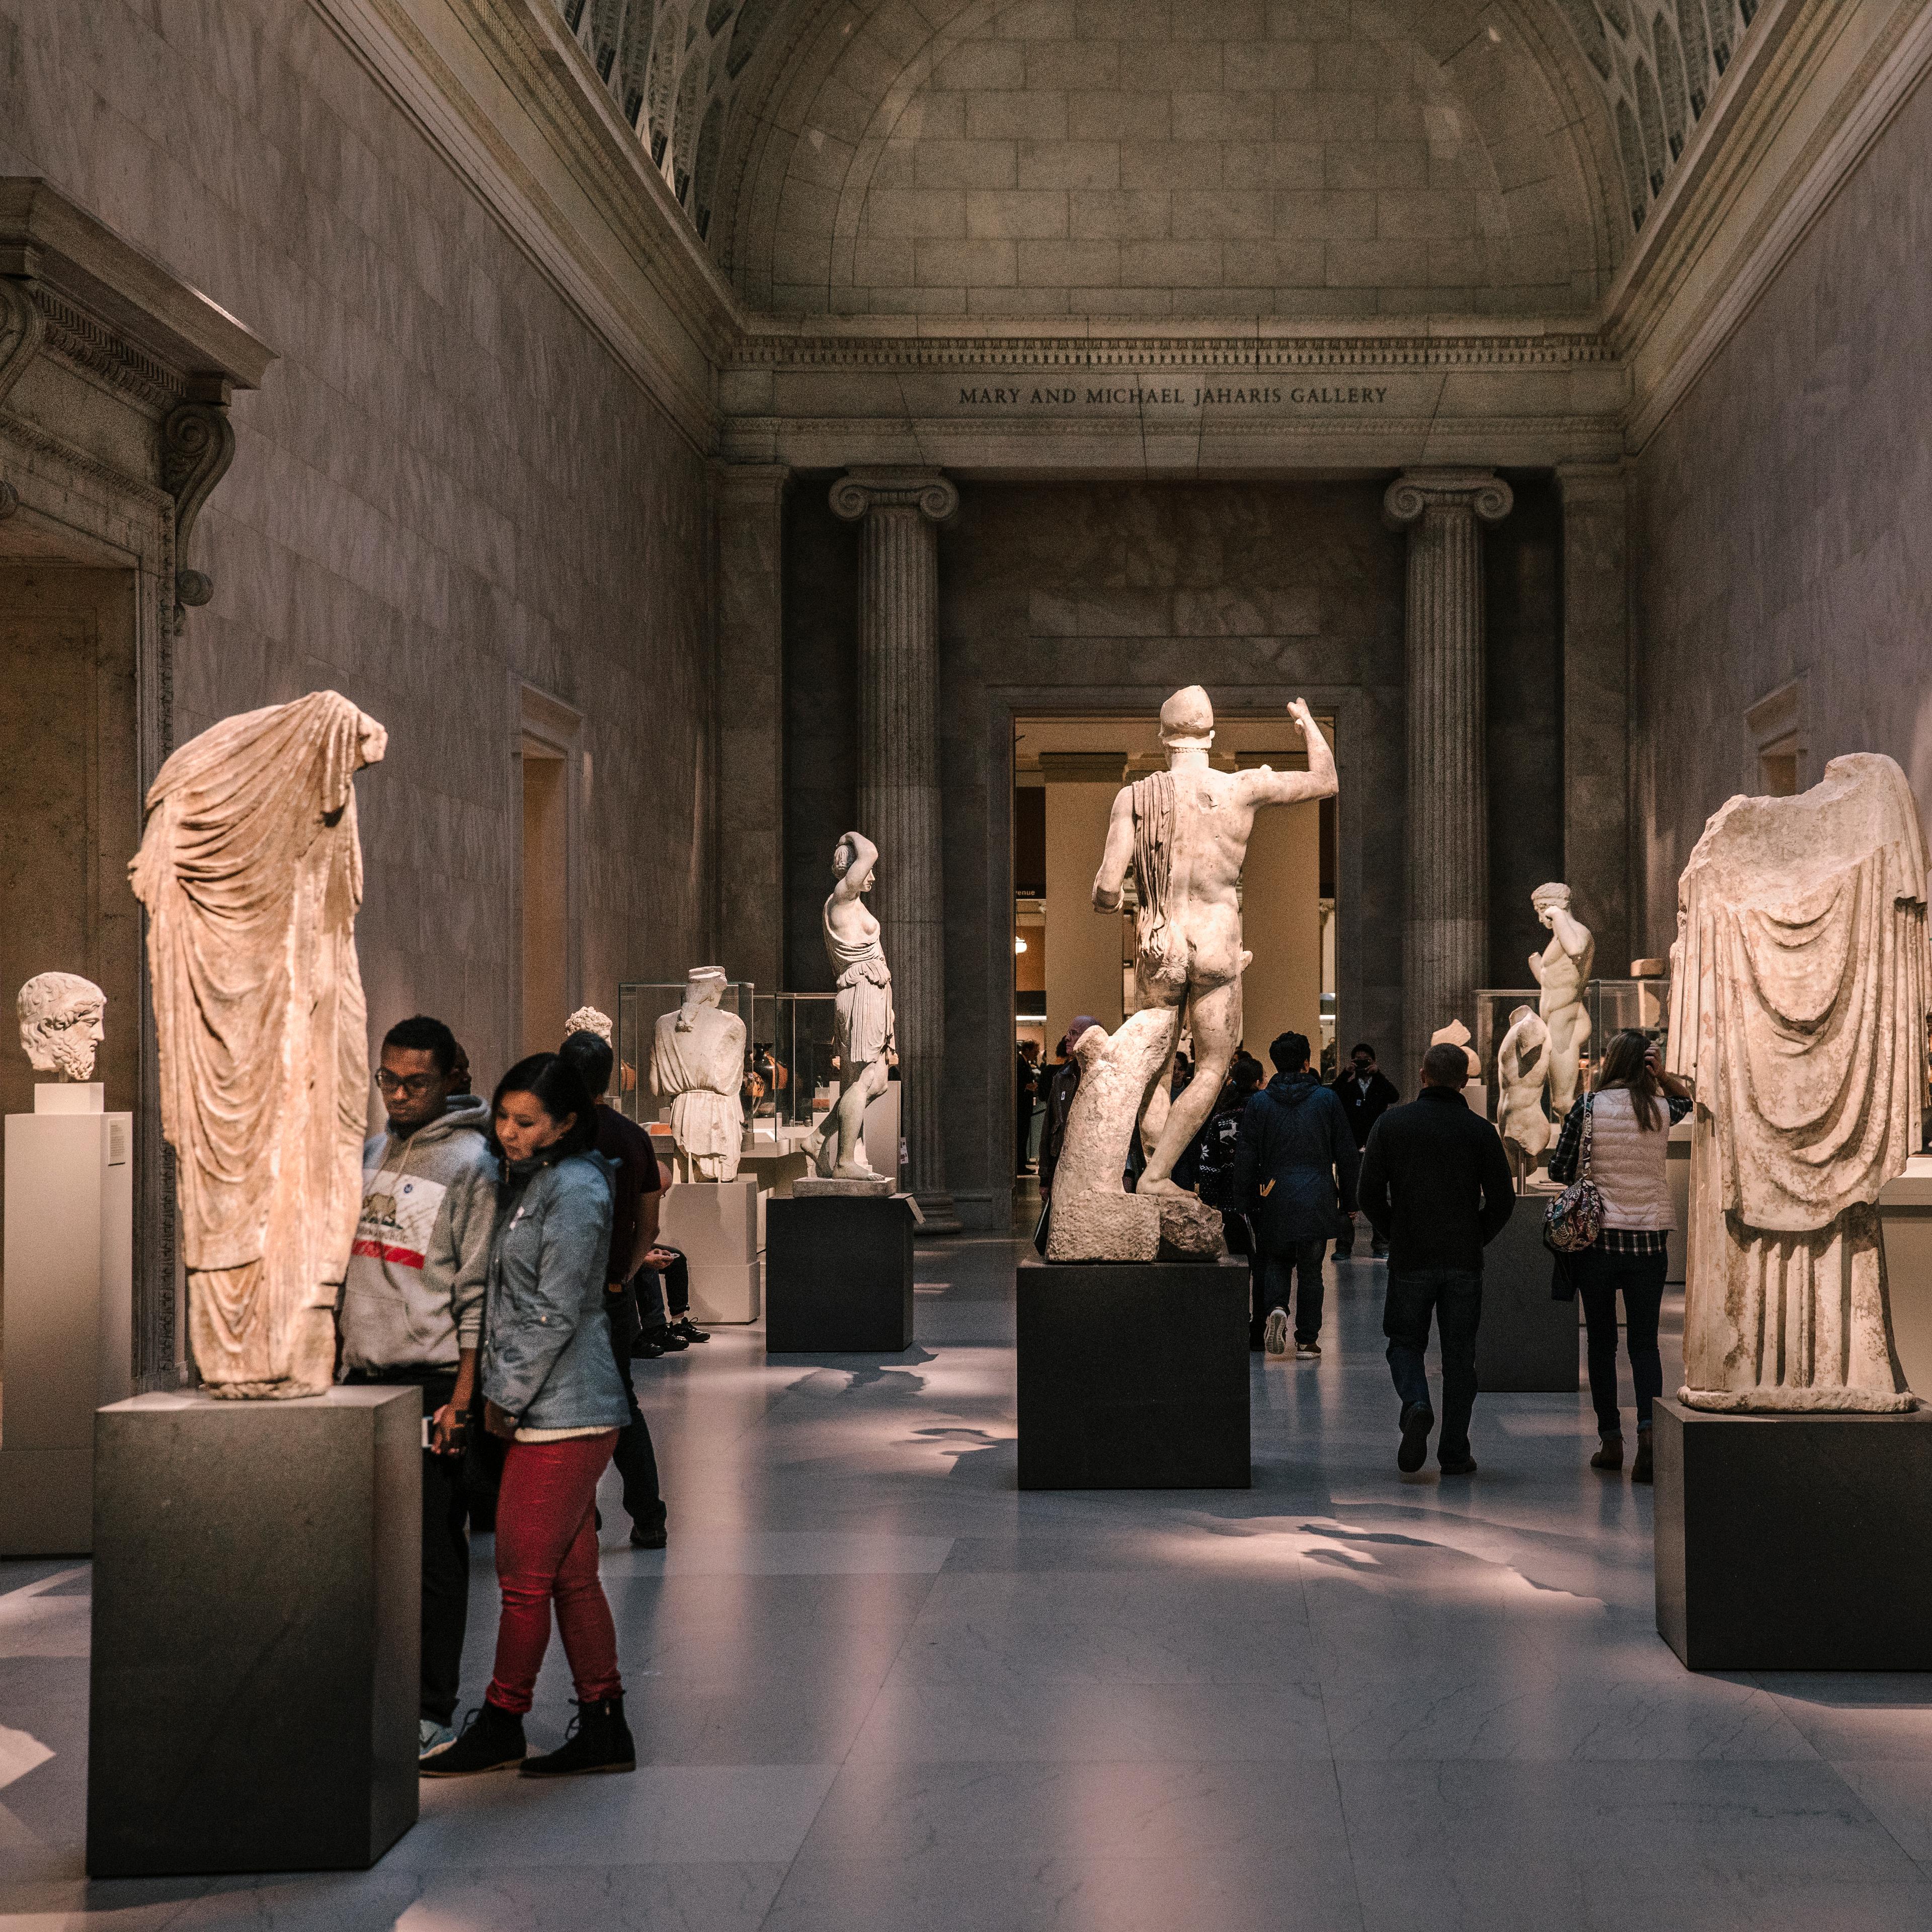 Visitors are in a Greek and Roman gallery at The Met that is filled with large white statues of figures. It's evening and the room is dark with spotlights on the art.  